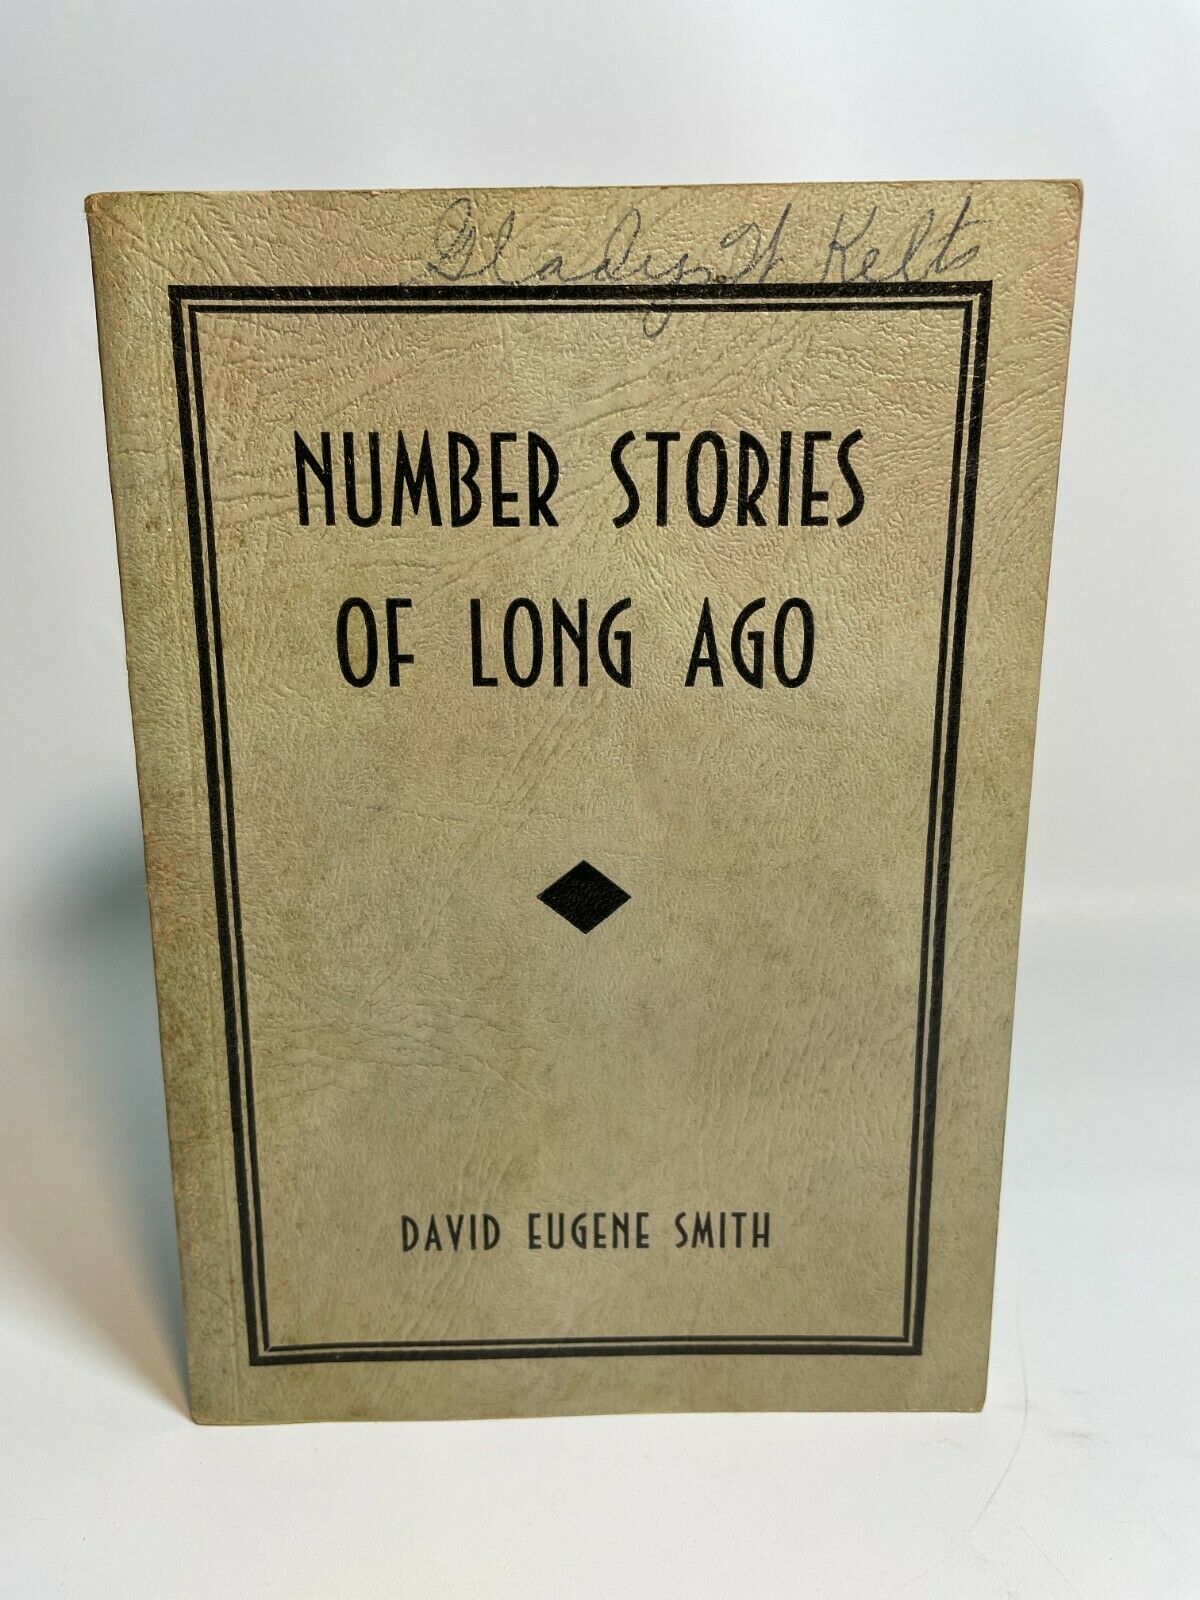 Number Stories of Long Ago, David Eugene Smith (1955) A2